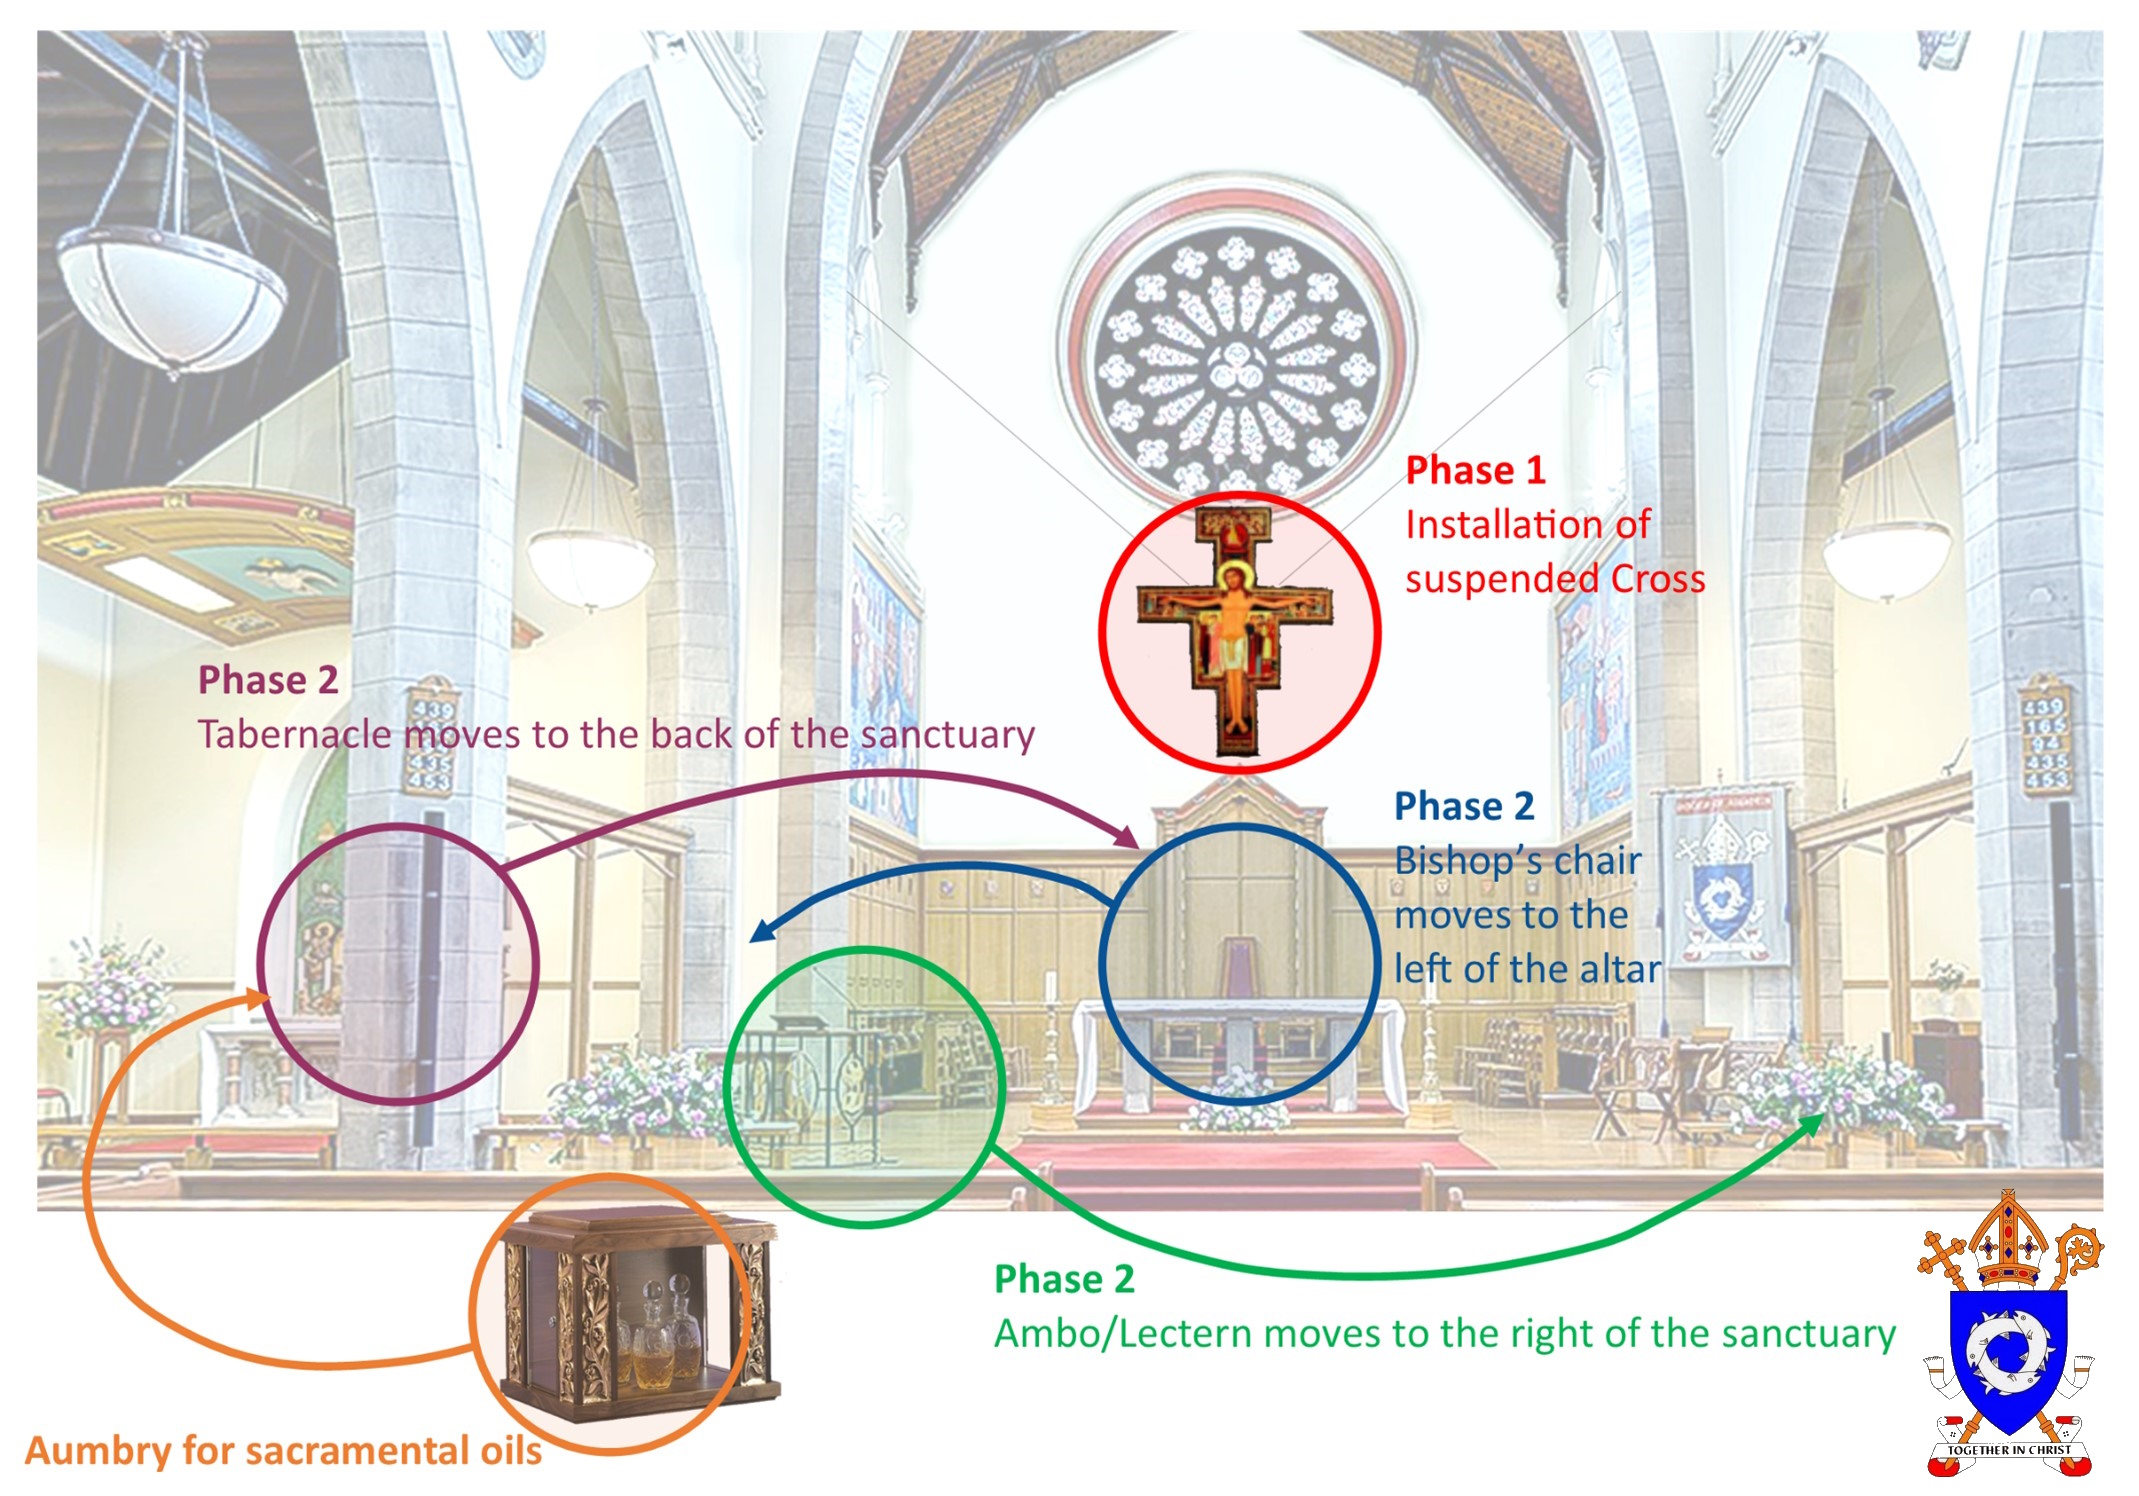 Sanctuary schematic with Coat of Arms.jpg